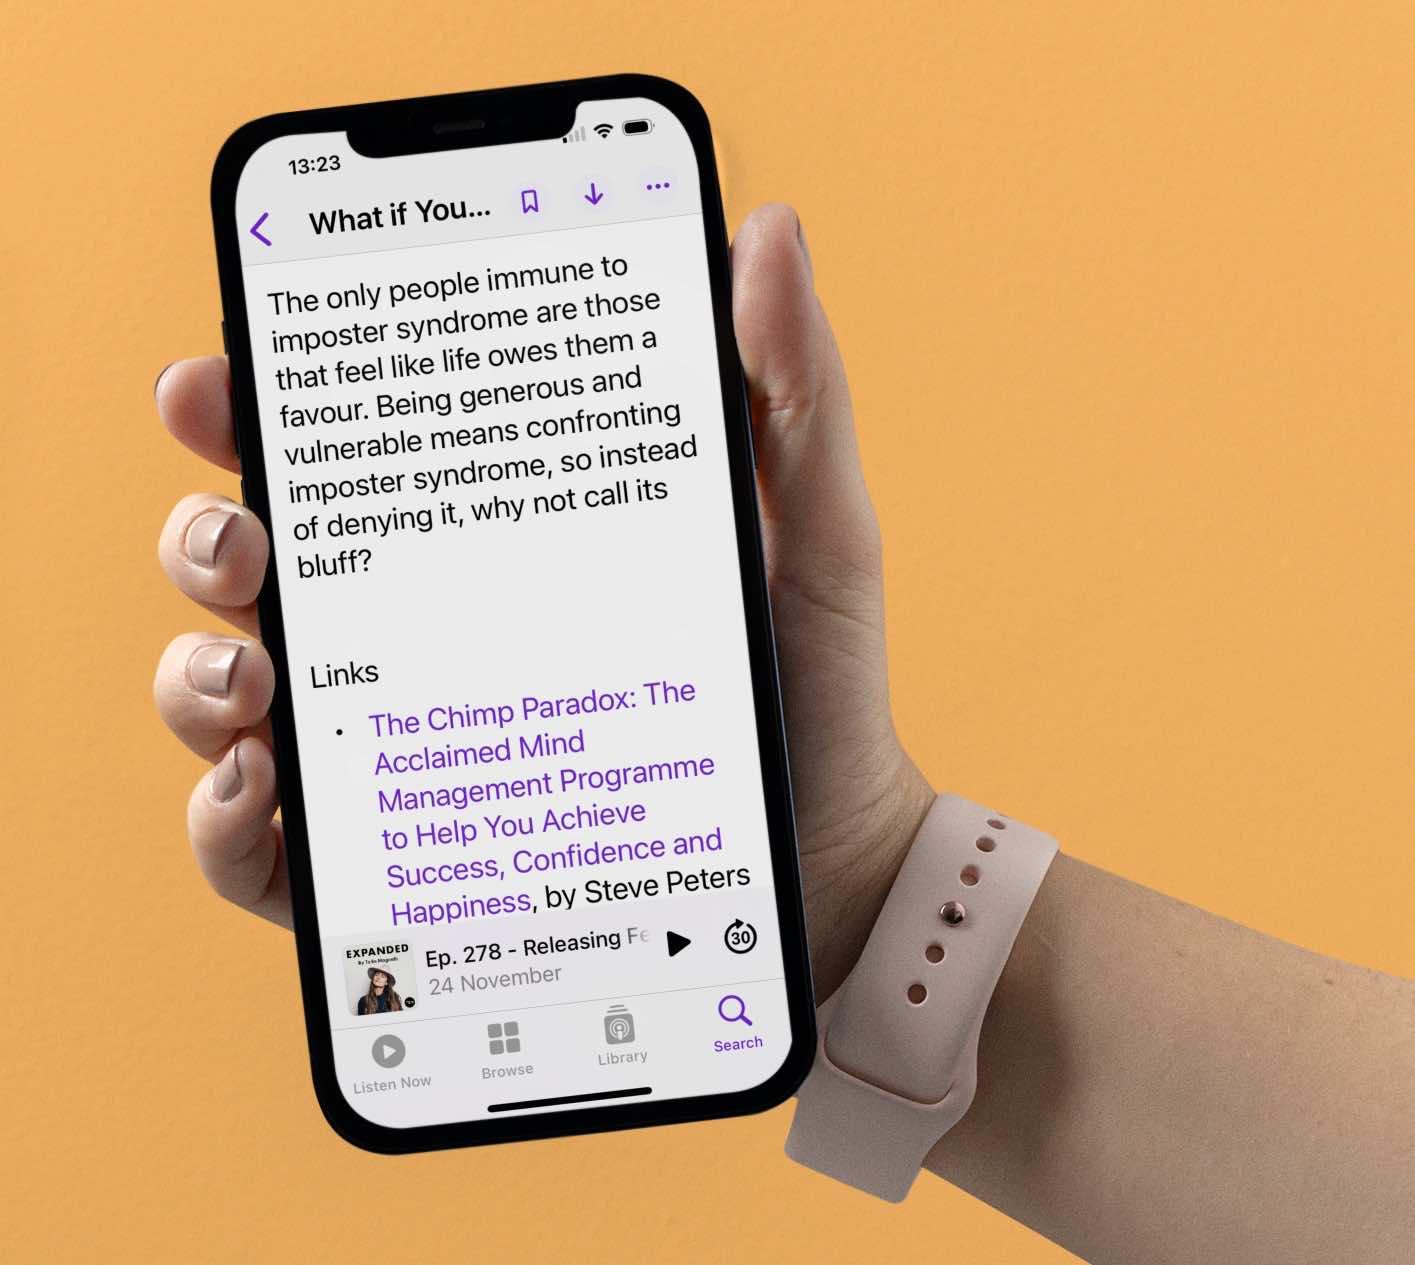 Hand holding an iPhone showing the Apple Podcasts app with an episode description